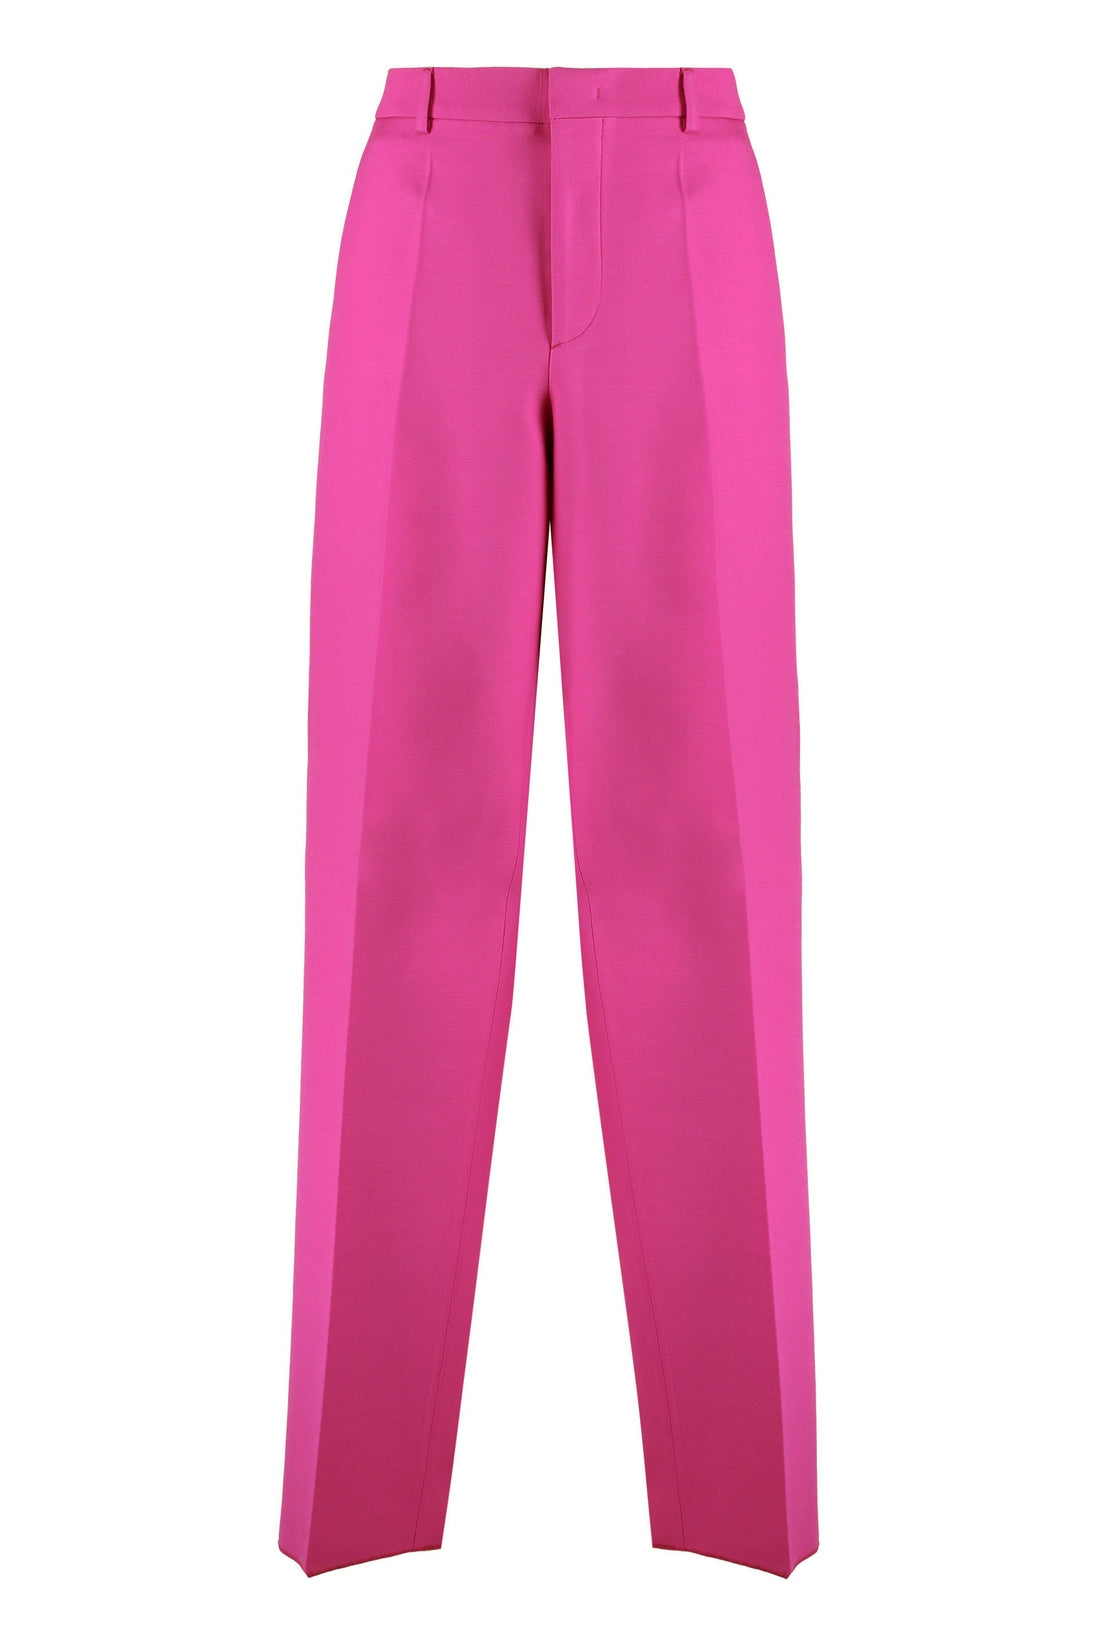 Valentino-OUTLET-SALE-Tailored wool trousers-ARCHIVIST